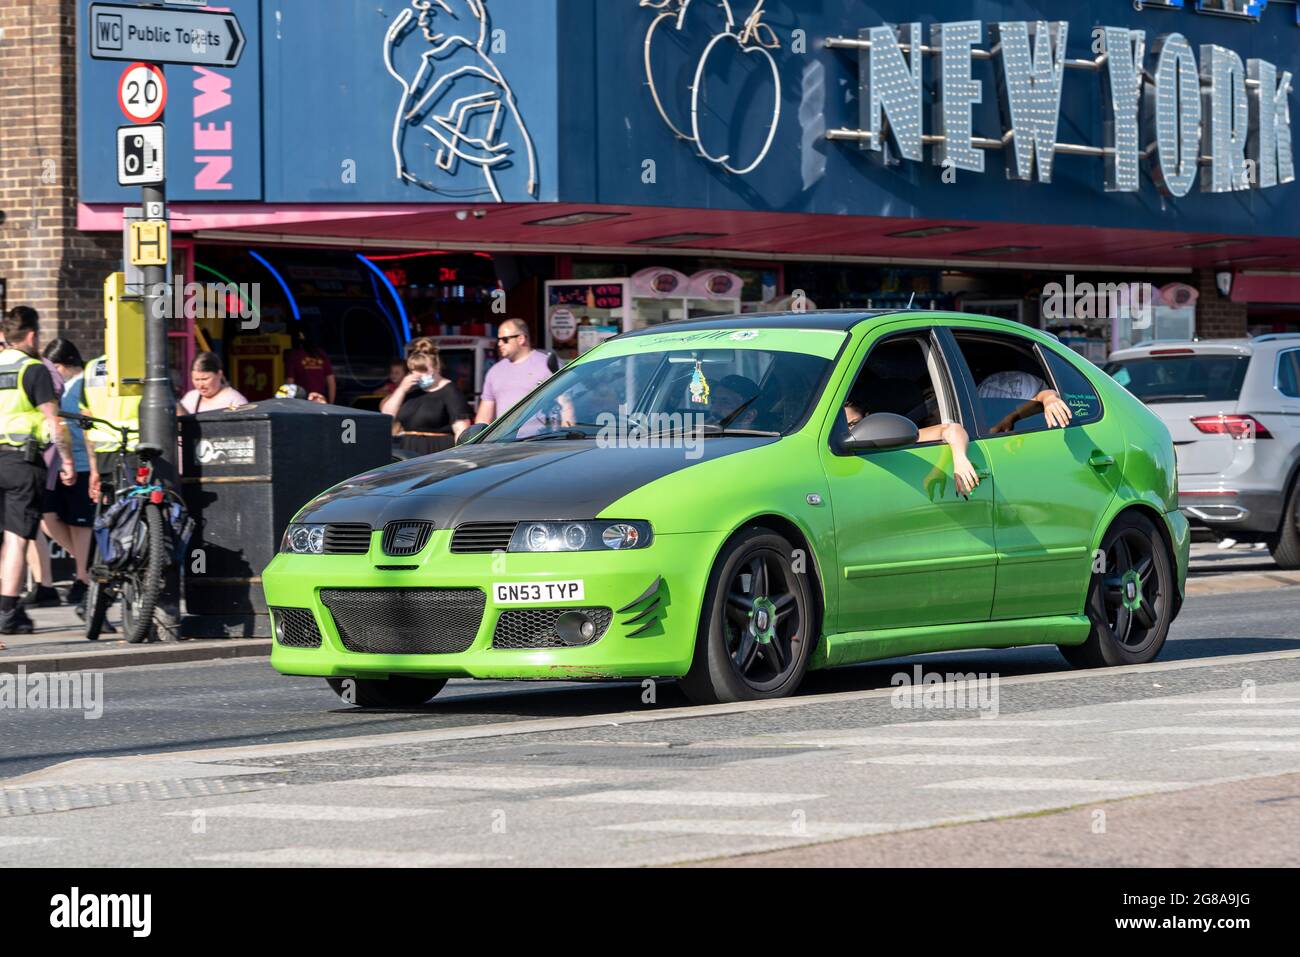 SEAT Leon custom car driving past cafes and amusement arcades on Marine Parade, Southend on Sea, Essex, UK. Lowered, modified. Youngsters inside Stock Photo